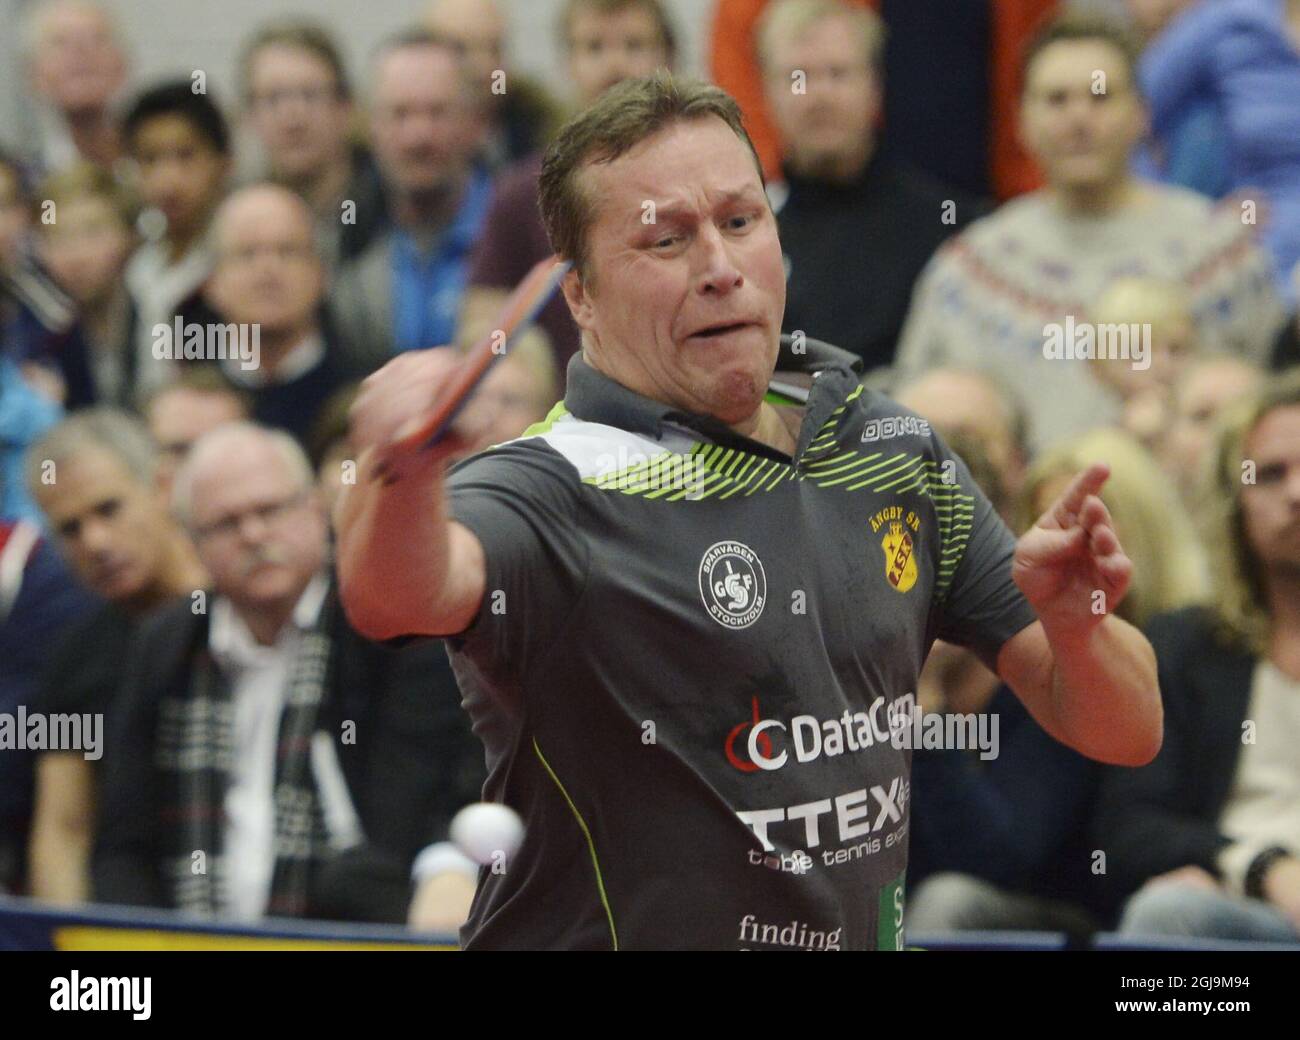 STOCKHOLM 2016-02-11 SwedernÃ‚Â´s teable tennis legend 50 years old Jan-Ove Waldner played his last match in Stoclkholm.,Sweden , February 11, 2017. Olympic goldmedalist and world champion Waldner ÃƒÂs widely regarded as being the greatest table tennis player of all time. A legend in his native Sweden as well as in China Foto: Maja Suslin / TT kod 10300  Stock Photo